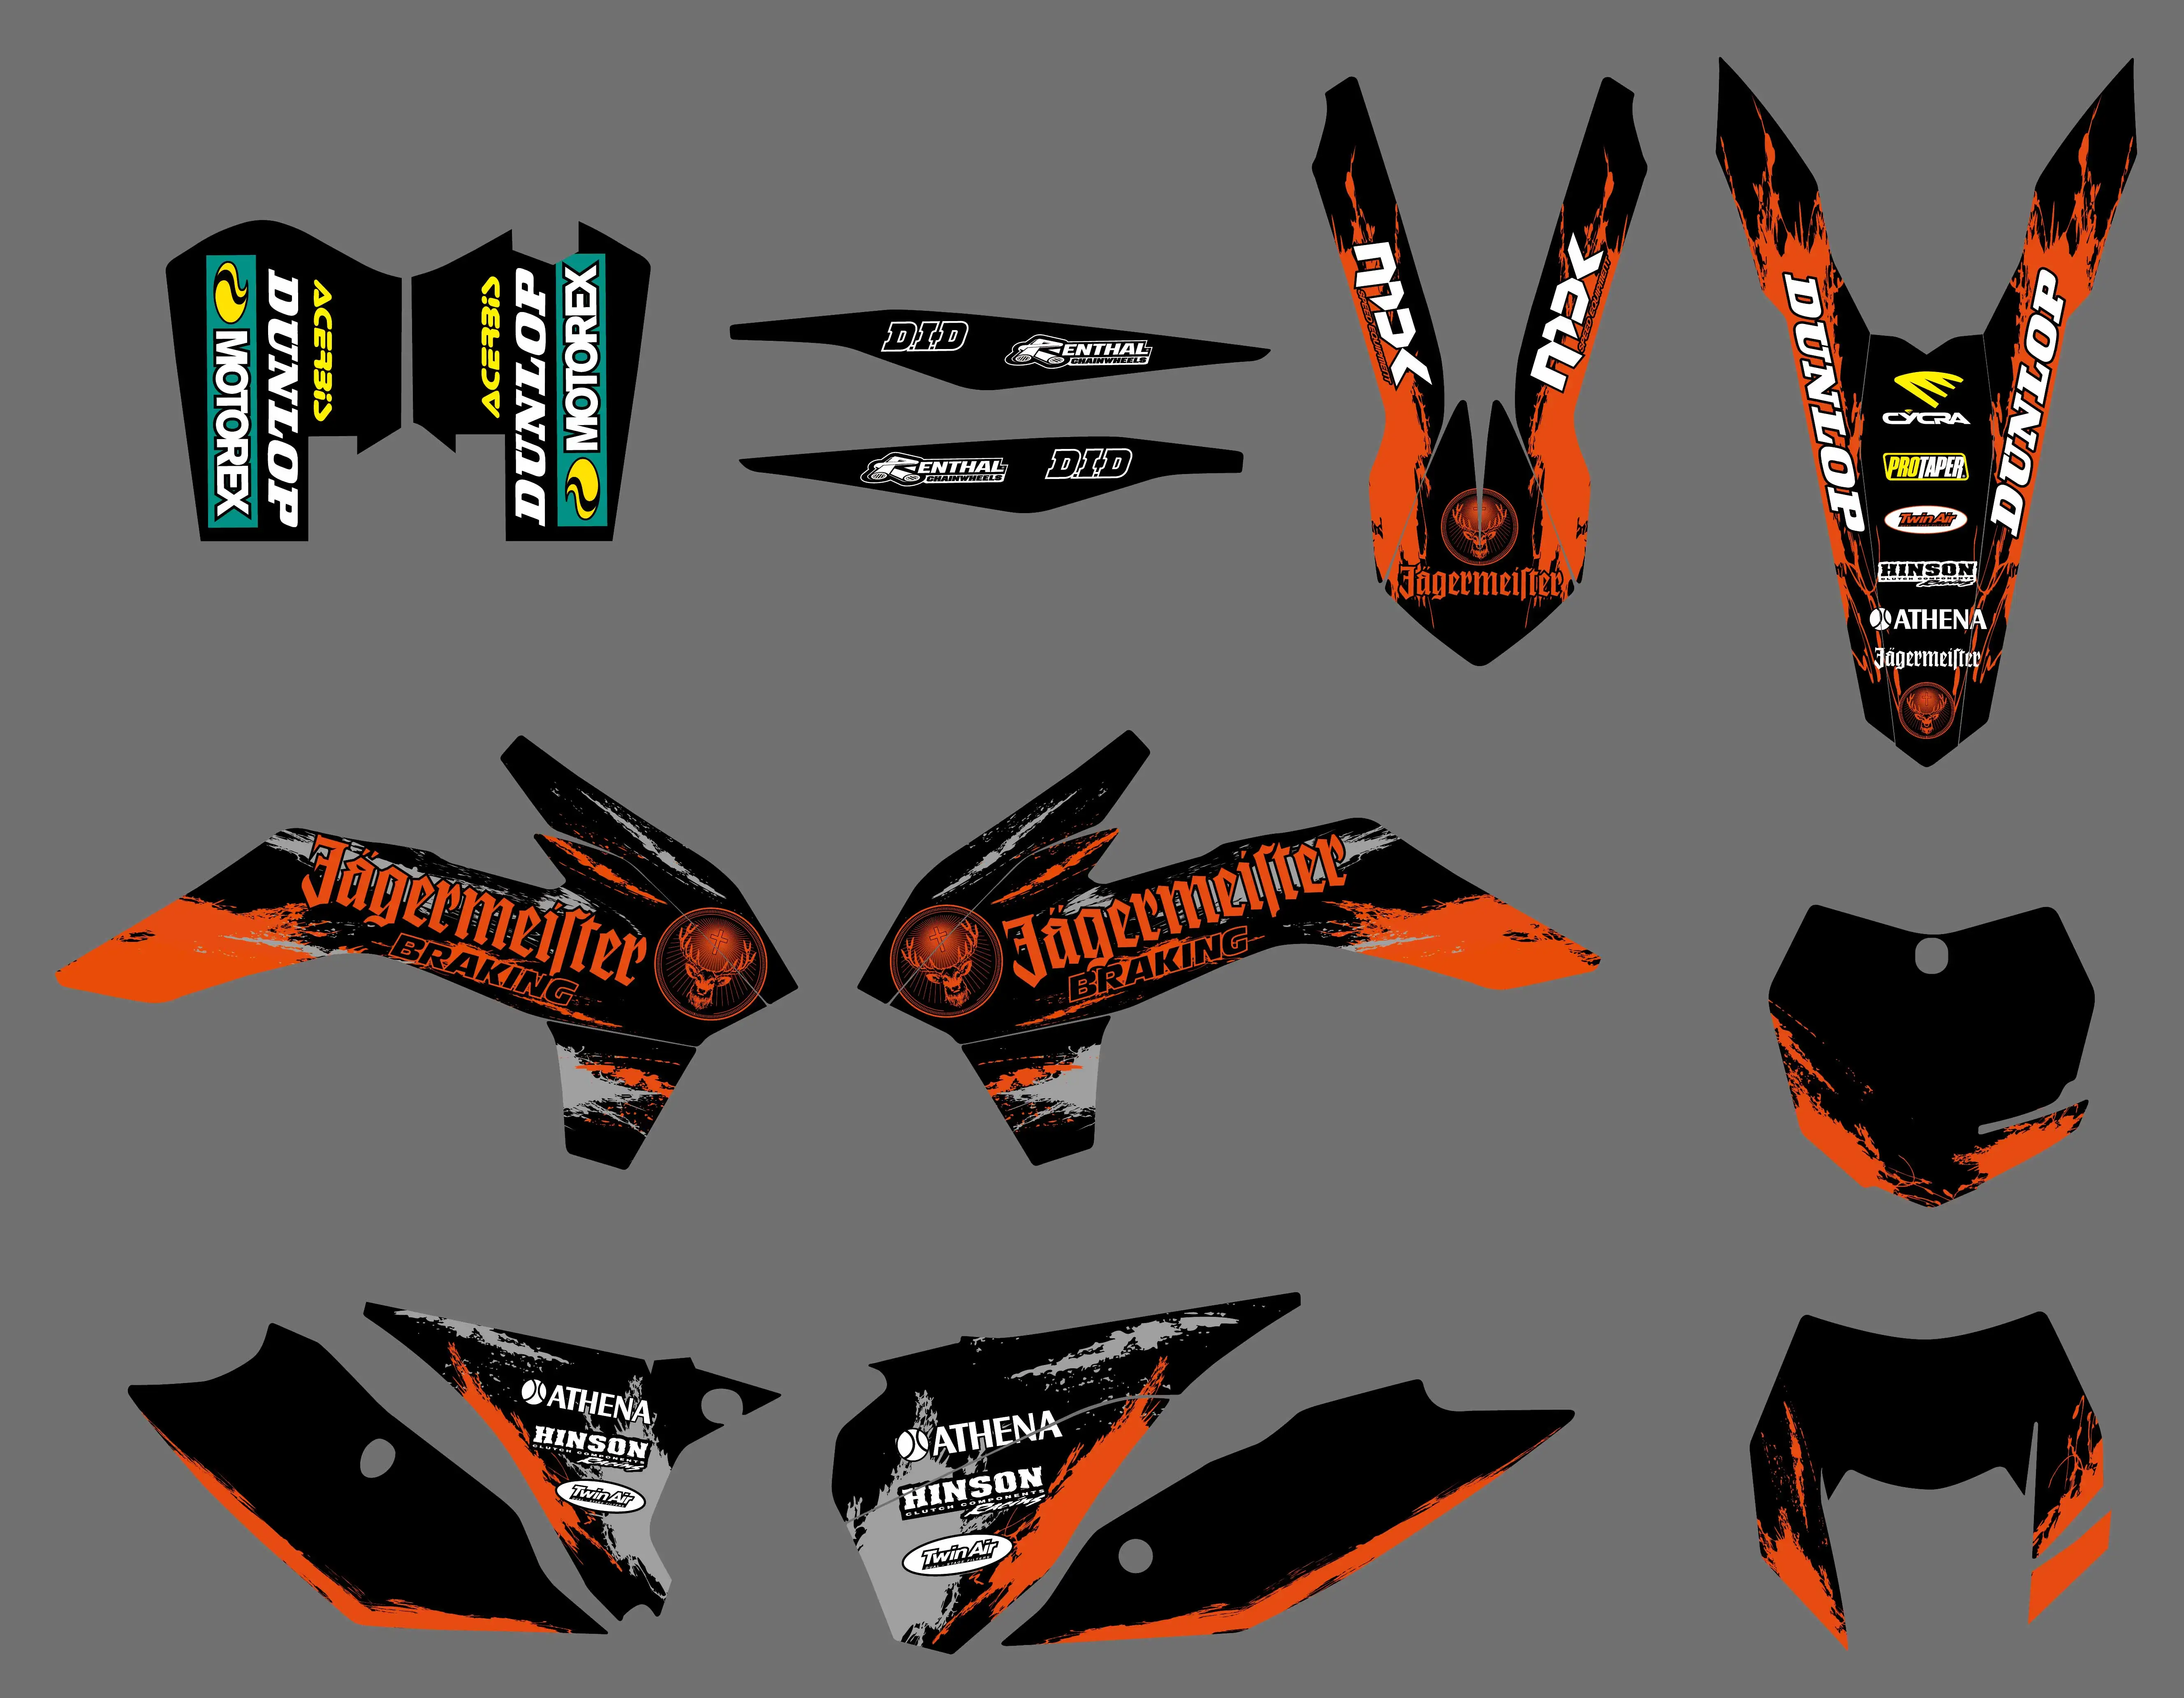 NICECNC Motorcycle Matching Team Graphic Decal Kit For KTM 125 200 250 300 350 450 500 EXC EXCF XCW XCF XCFW 2014 14